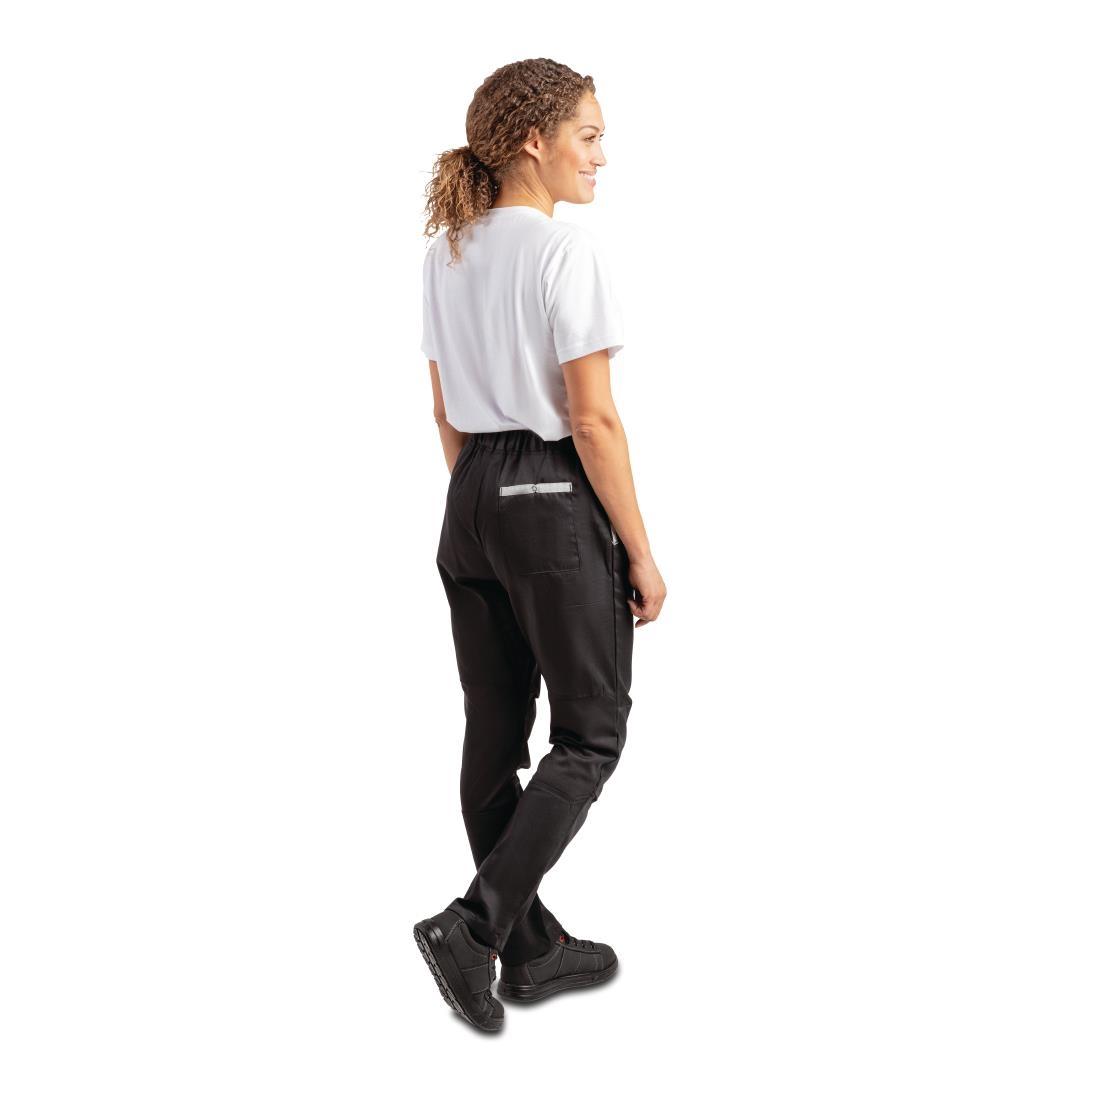 Southside Chefs Utility Trousers Black S - B989-S  - 3